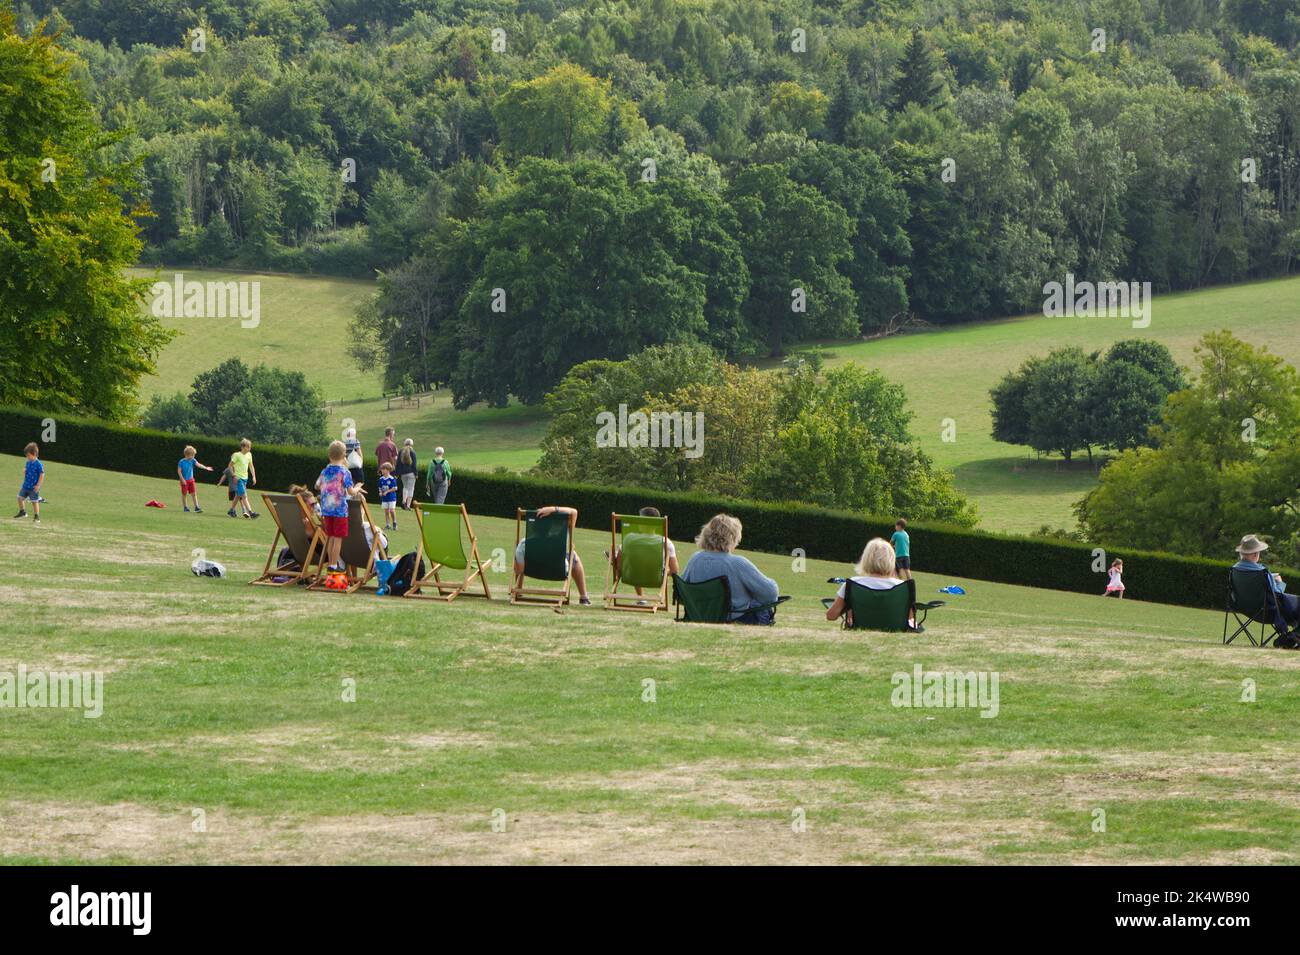 People outside in deckchairs on lawn of country house in Surrey, England Stock Photo